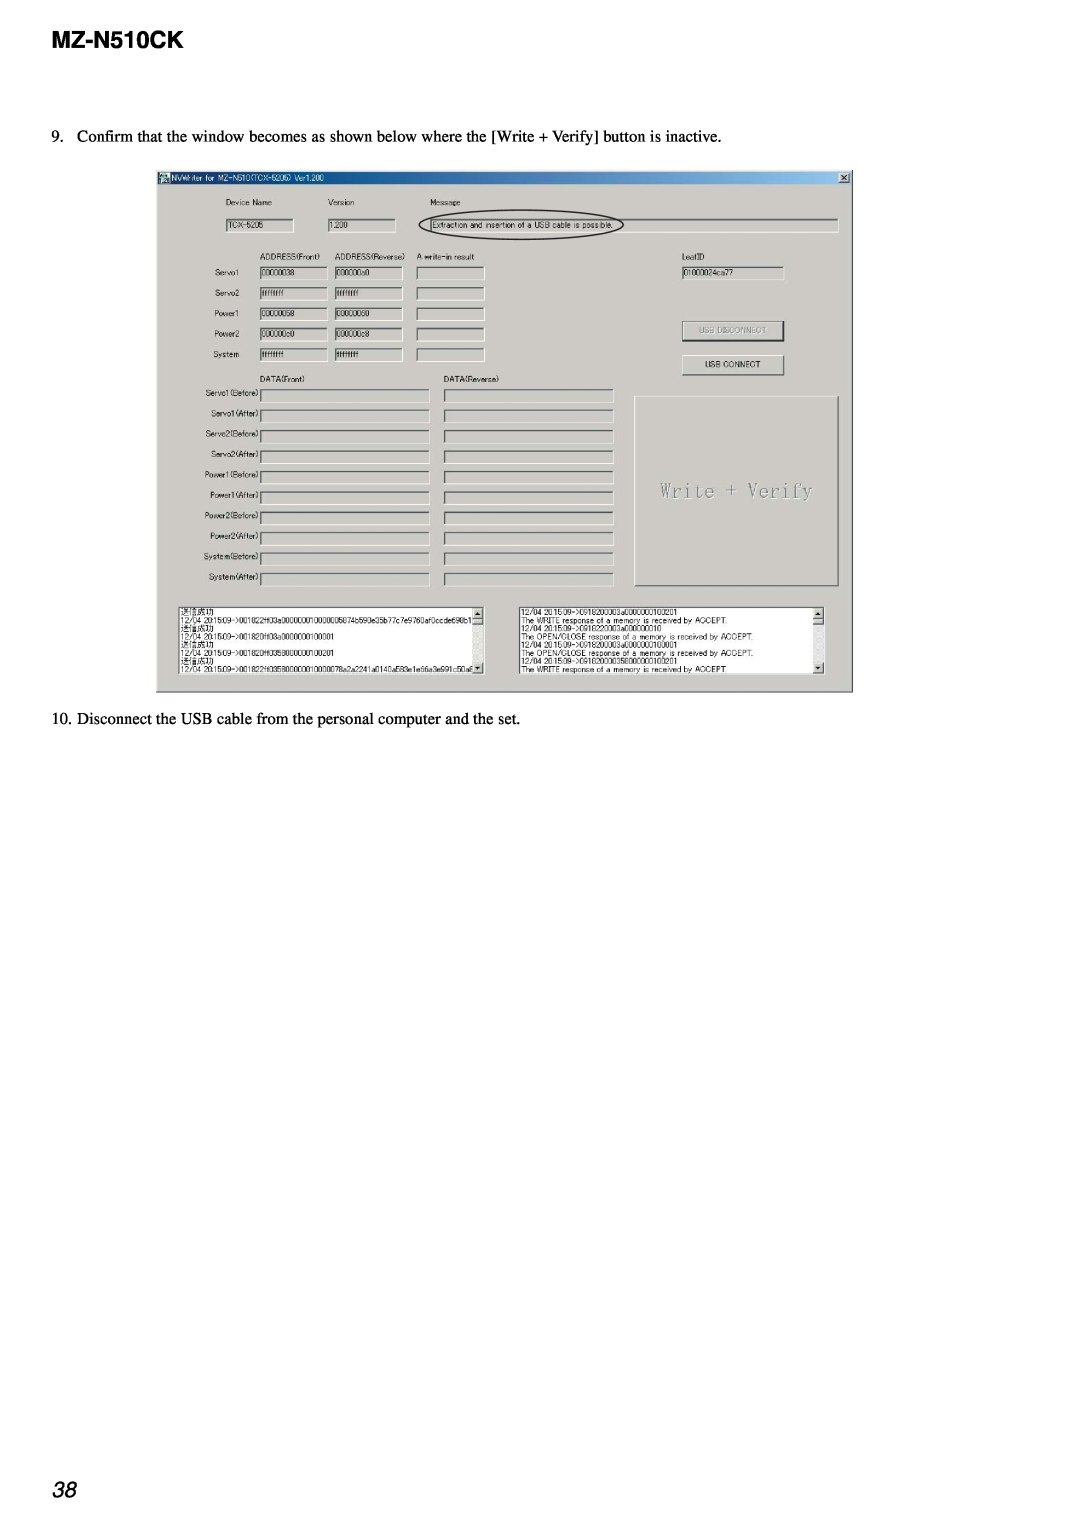 Sony MZ-N510CK service manual Confirm that the window becomes as shown below where the Write + Verify button is inactive 